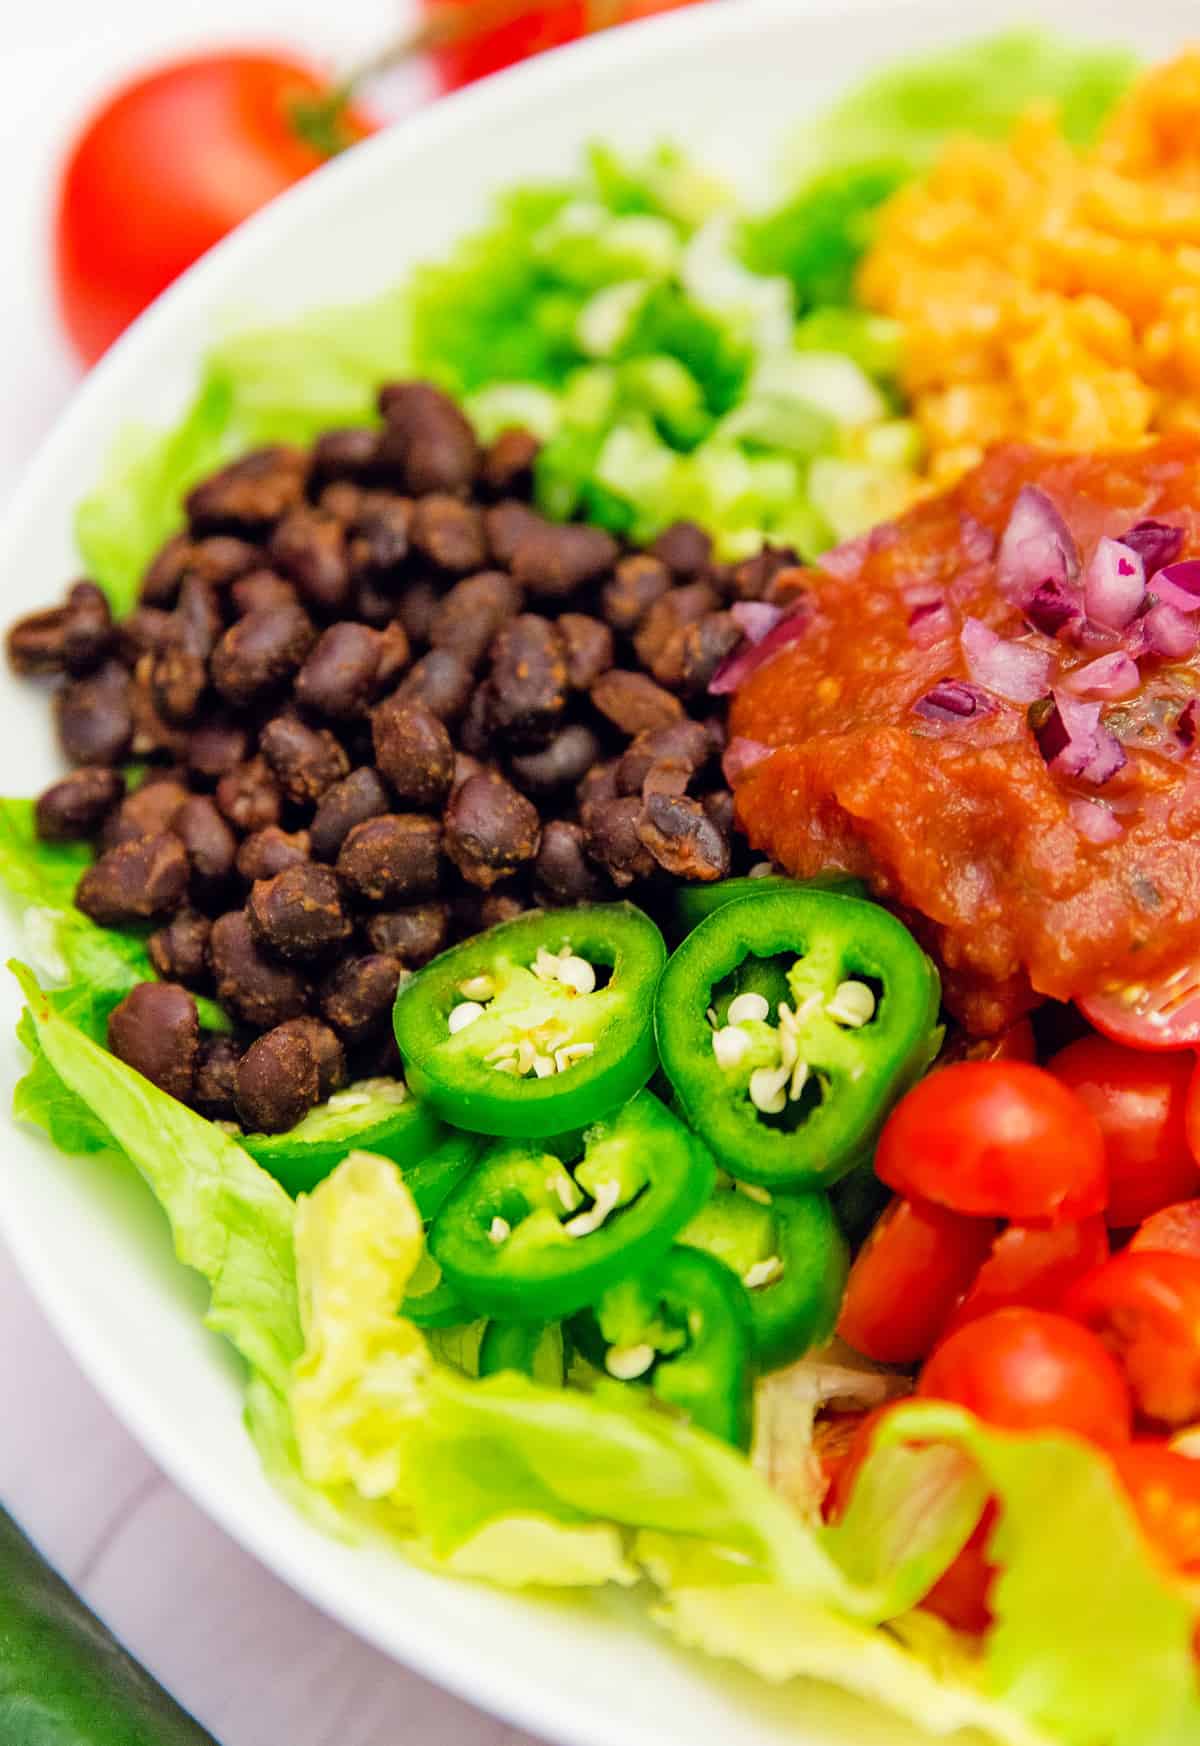 Salsa veggie bowl, veggie bowl, salsa bowl, whole food plant based bowl, recipe, veggie bowl recipe, whole food plant based salad, salsa bowl recipe, vegan, vegan recipe, whole food plant based recipe, whole food plant based, vegetarian, vegetarian recipe, gluten free, gluten free recipe, vegan dinner, vegan lunch, vegan meals, vegetarian dinner, vegetarian lunch, vegetarian meal, whole food plant based dinner, whole food plant based lunch, whole food plant based meal, gluten free dinner, gluten free lunch, gluten free meal, healthy, oil free, no oil, red onions, black beans, lettuce, salad, corn, Mexican rice, Spanish rice, rice, black beans, green onions, tomatoes, jalapeño, quick dinner, avocado, salsa dressing, fast dinner, entertaining, wfpb, dairy free, no dairy, traditional, Mexican, Southwestern, classic, delicious, the best, winter, fall, spring, summer, fast, easy, quick, simple, 30 minutes,